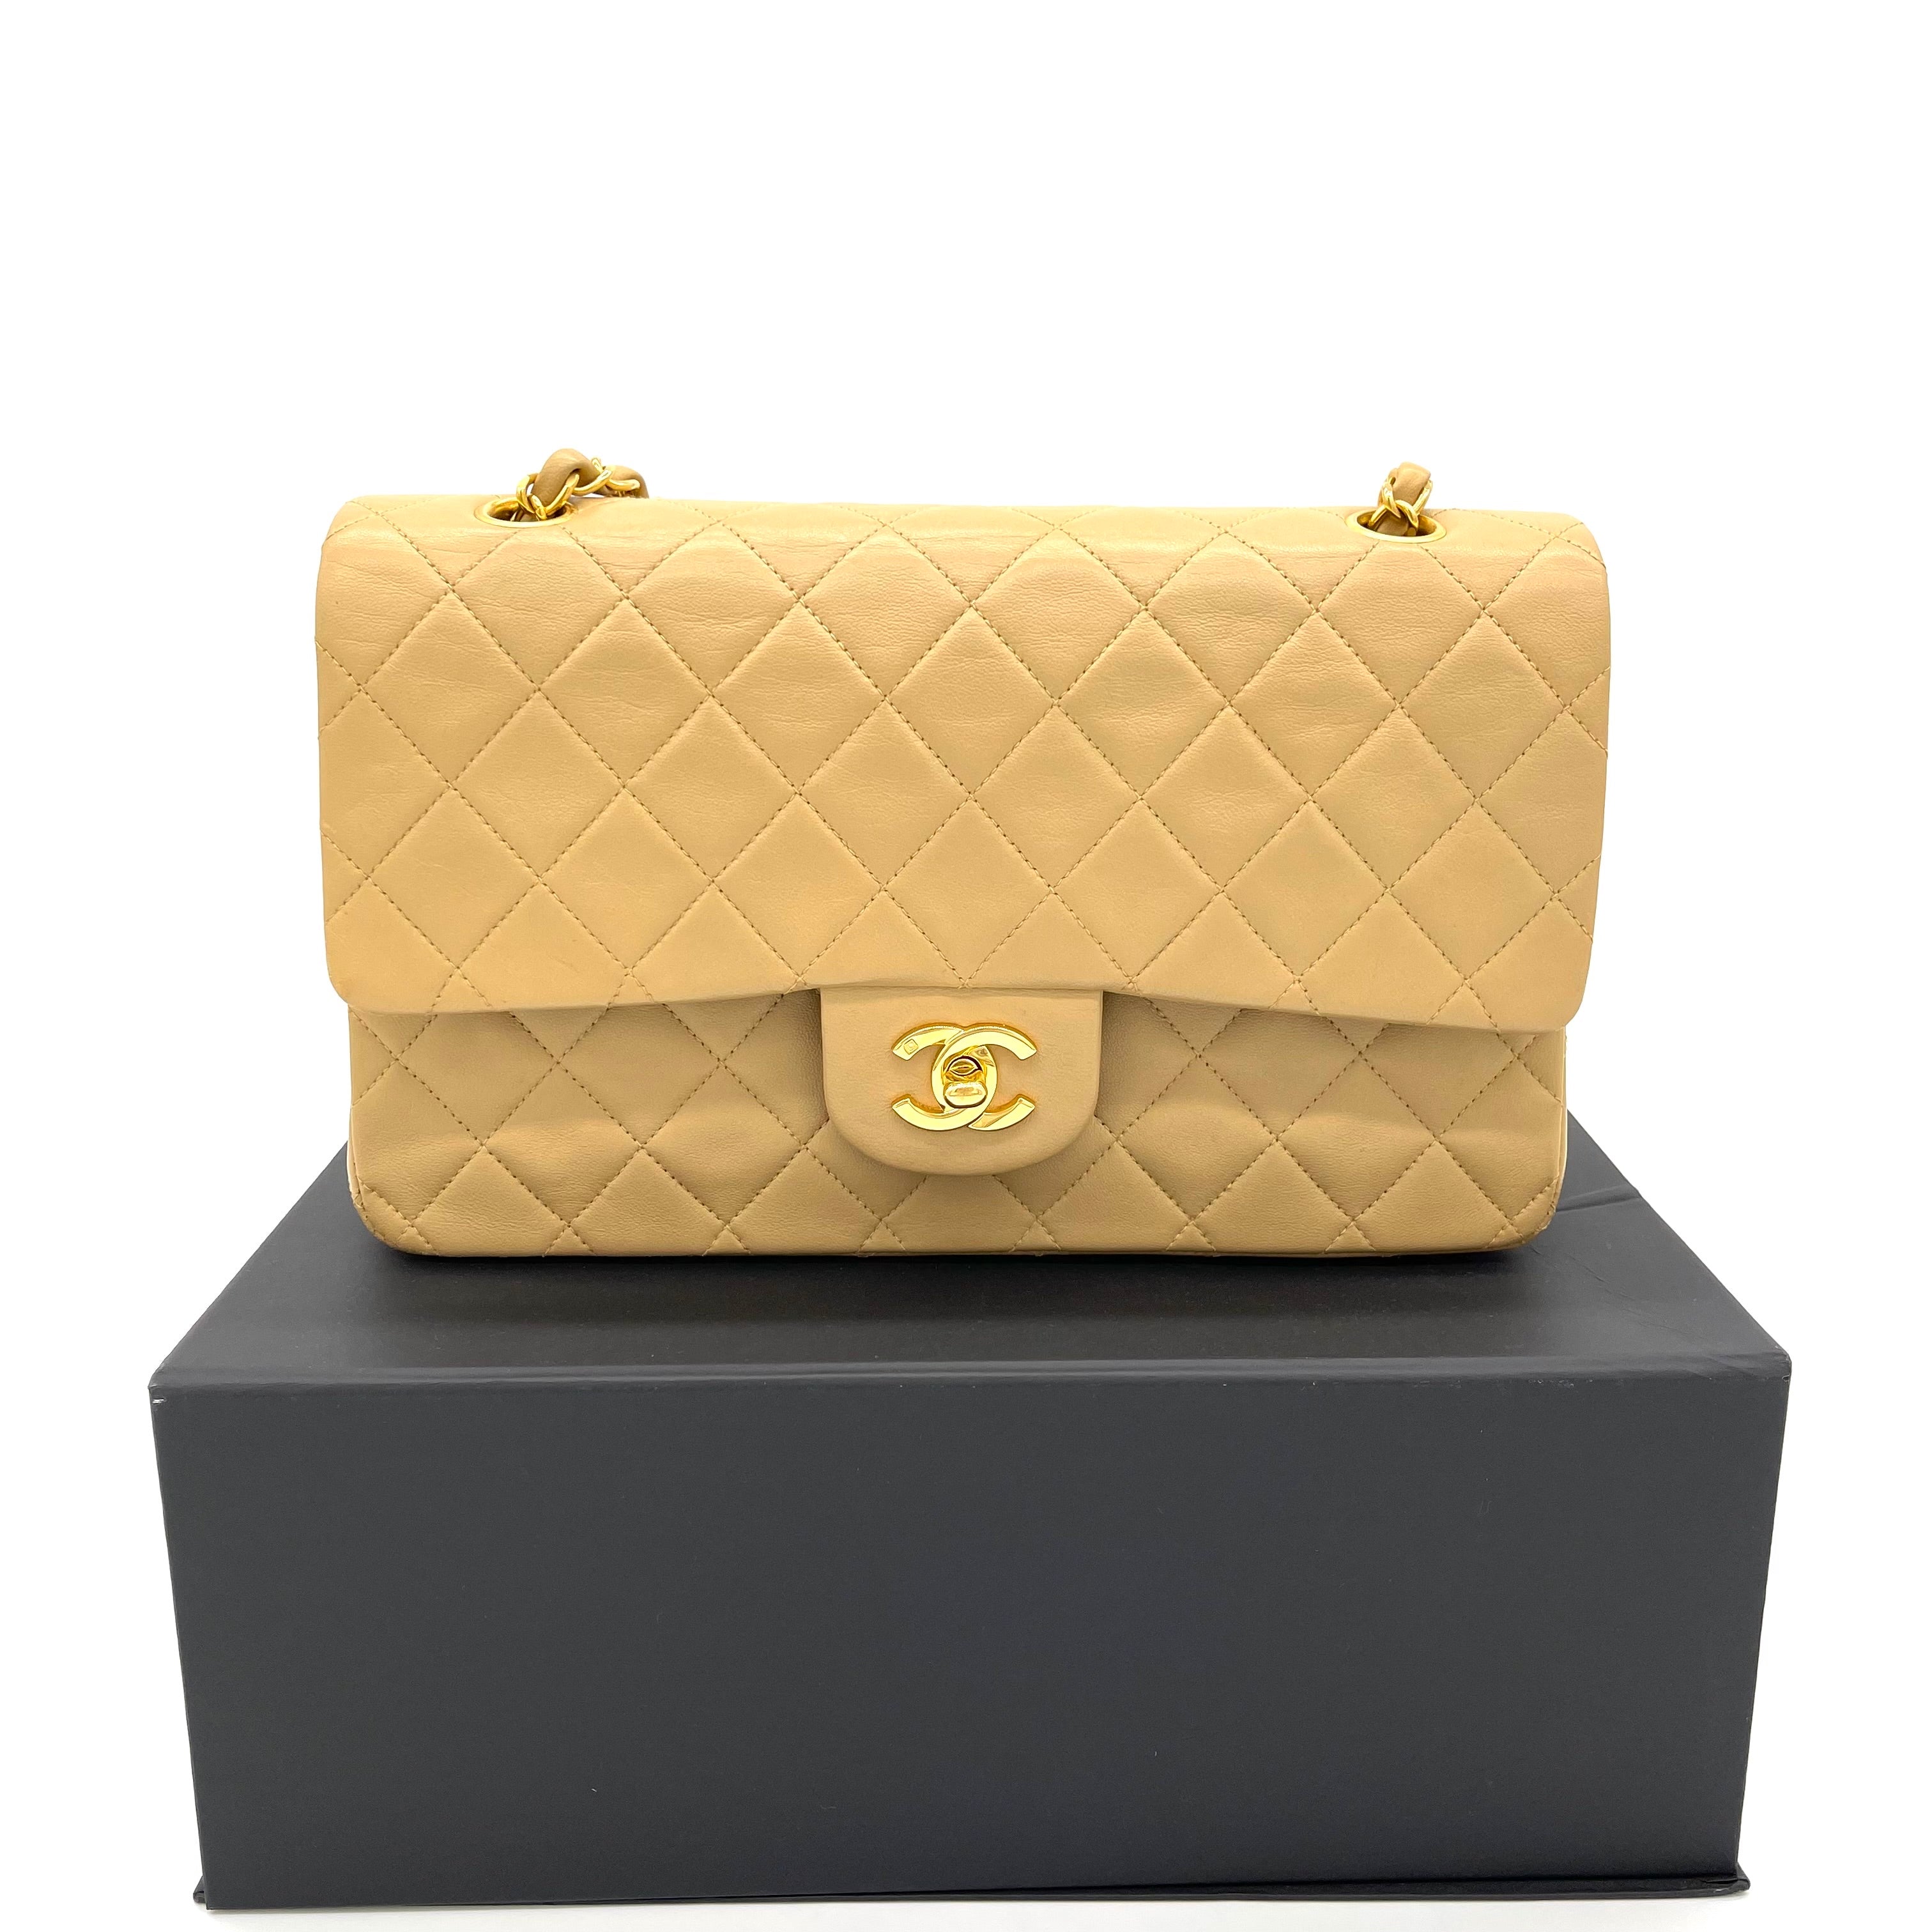 Chanel Yellow Lambskin Quilted Leather Medium Double Flap Bag